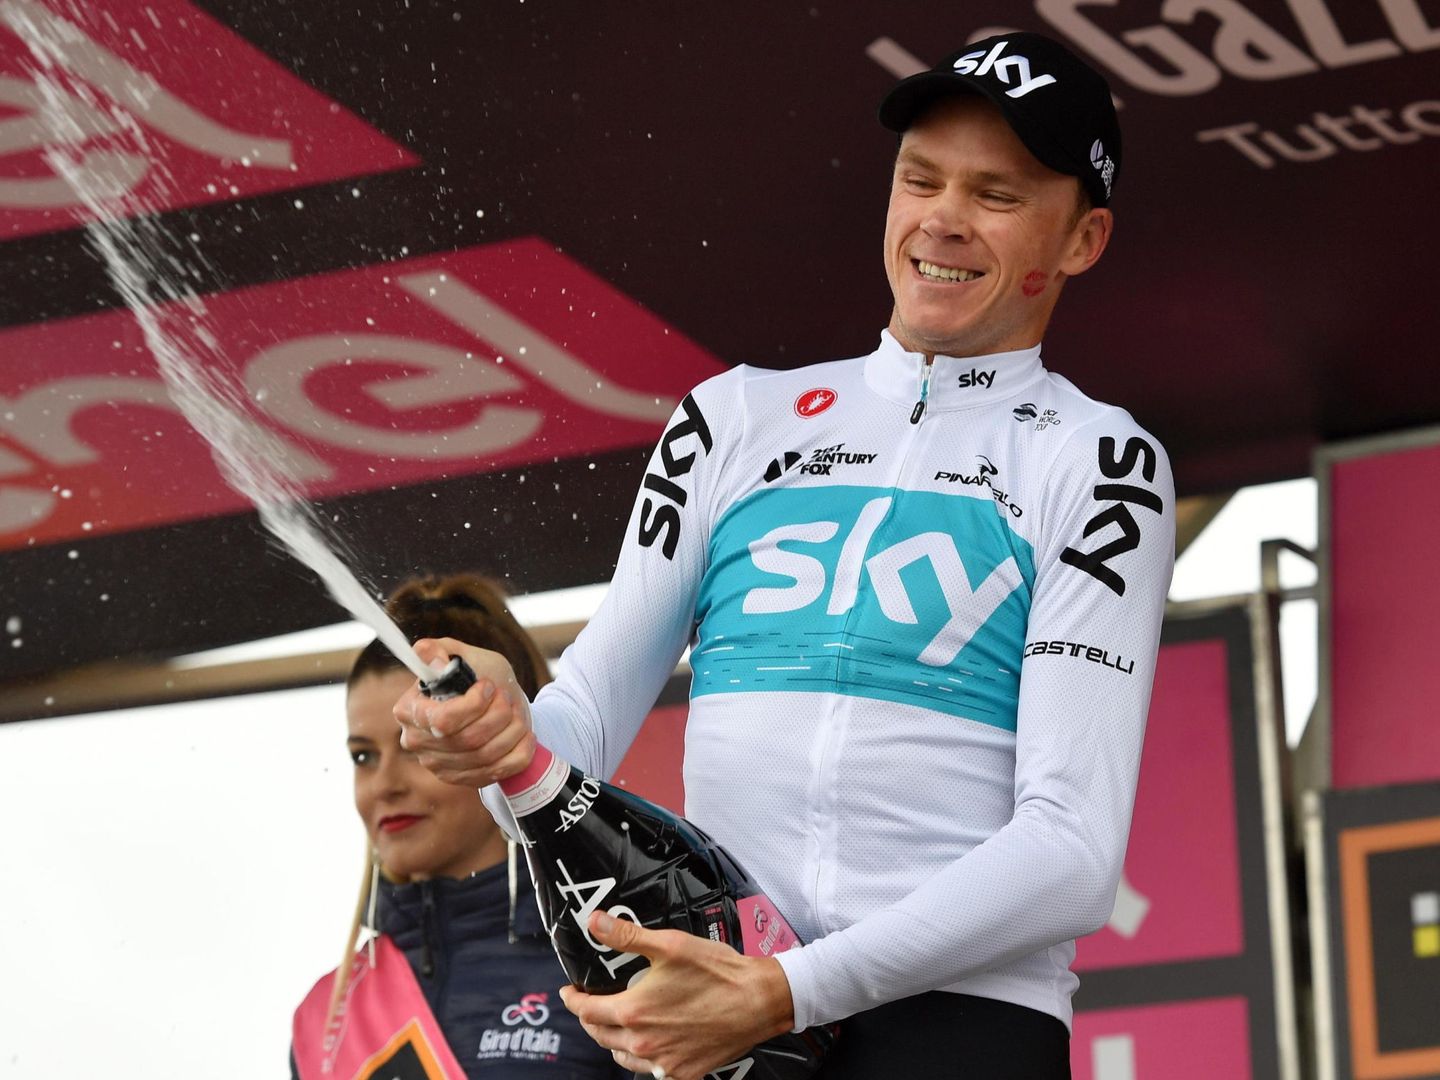 Chris Froome. (Reuters)